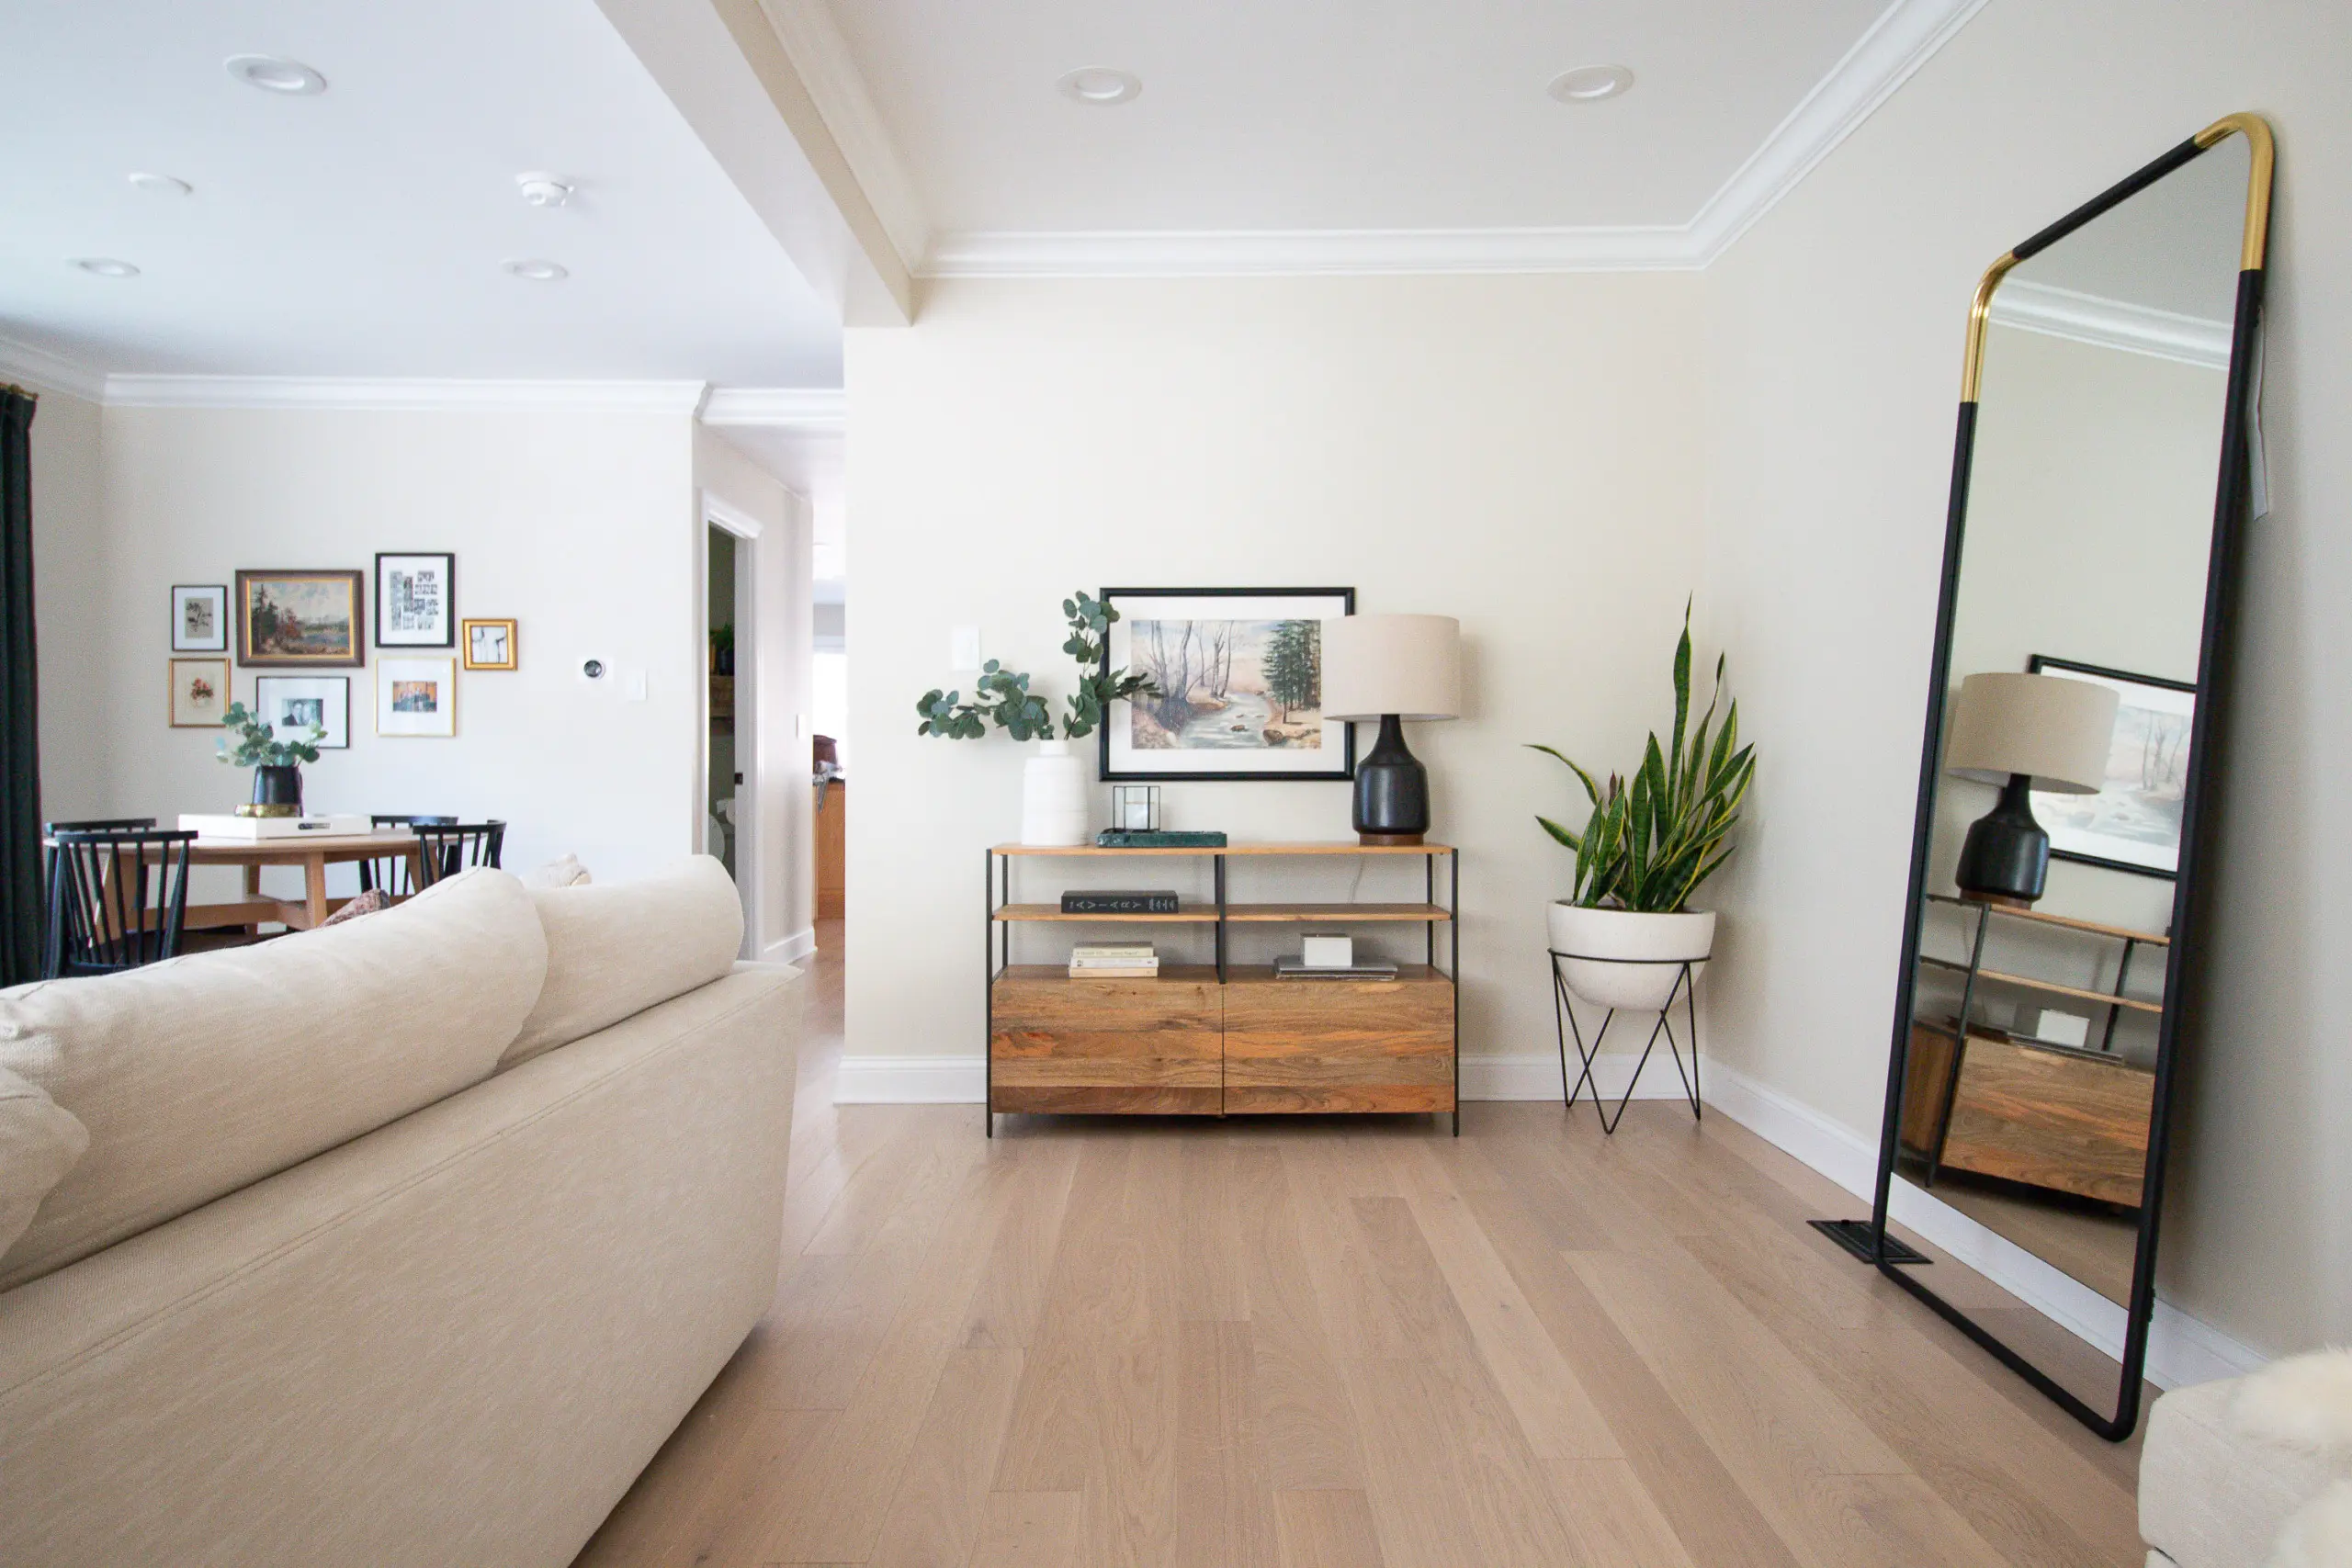 Our white oak floors in our living room